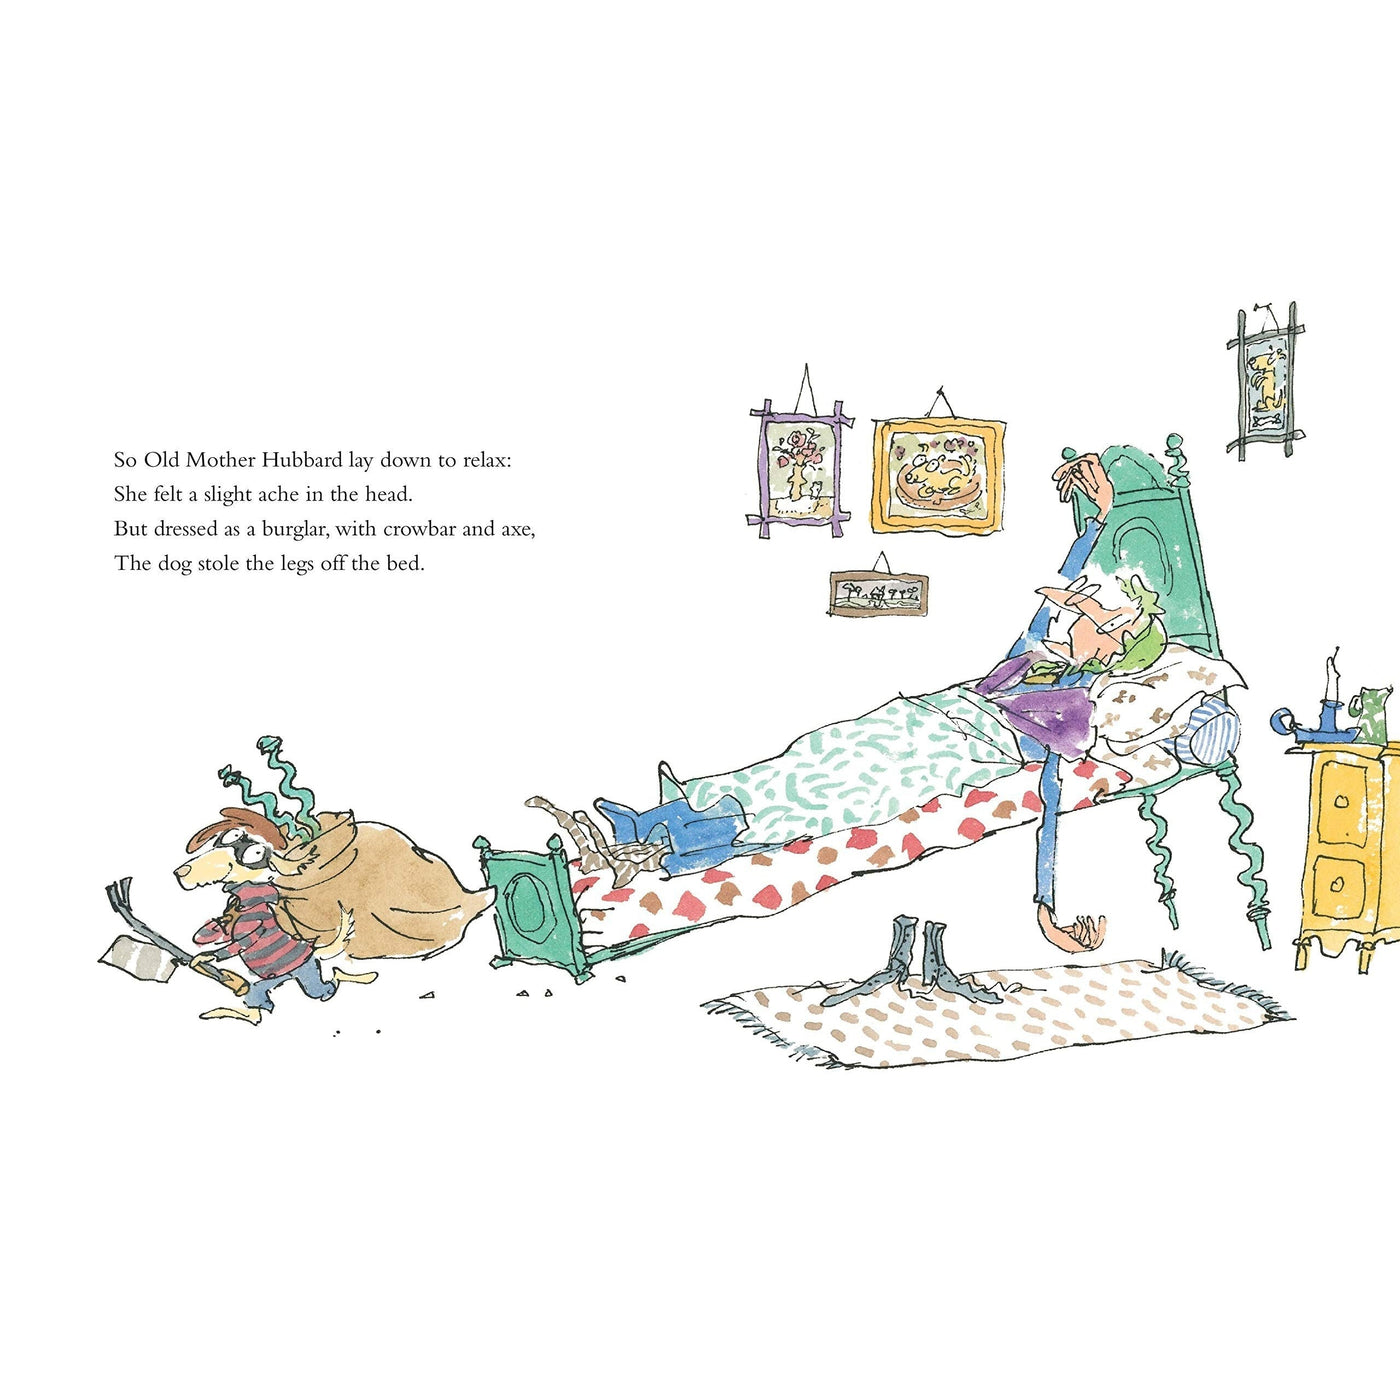 Old Mother Hubbard's Dog Dresses Up - John Yeoman & Quentin Blake